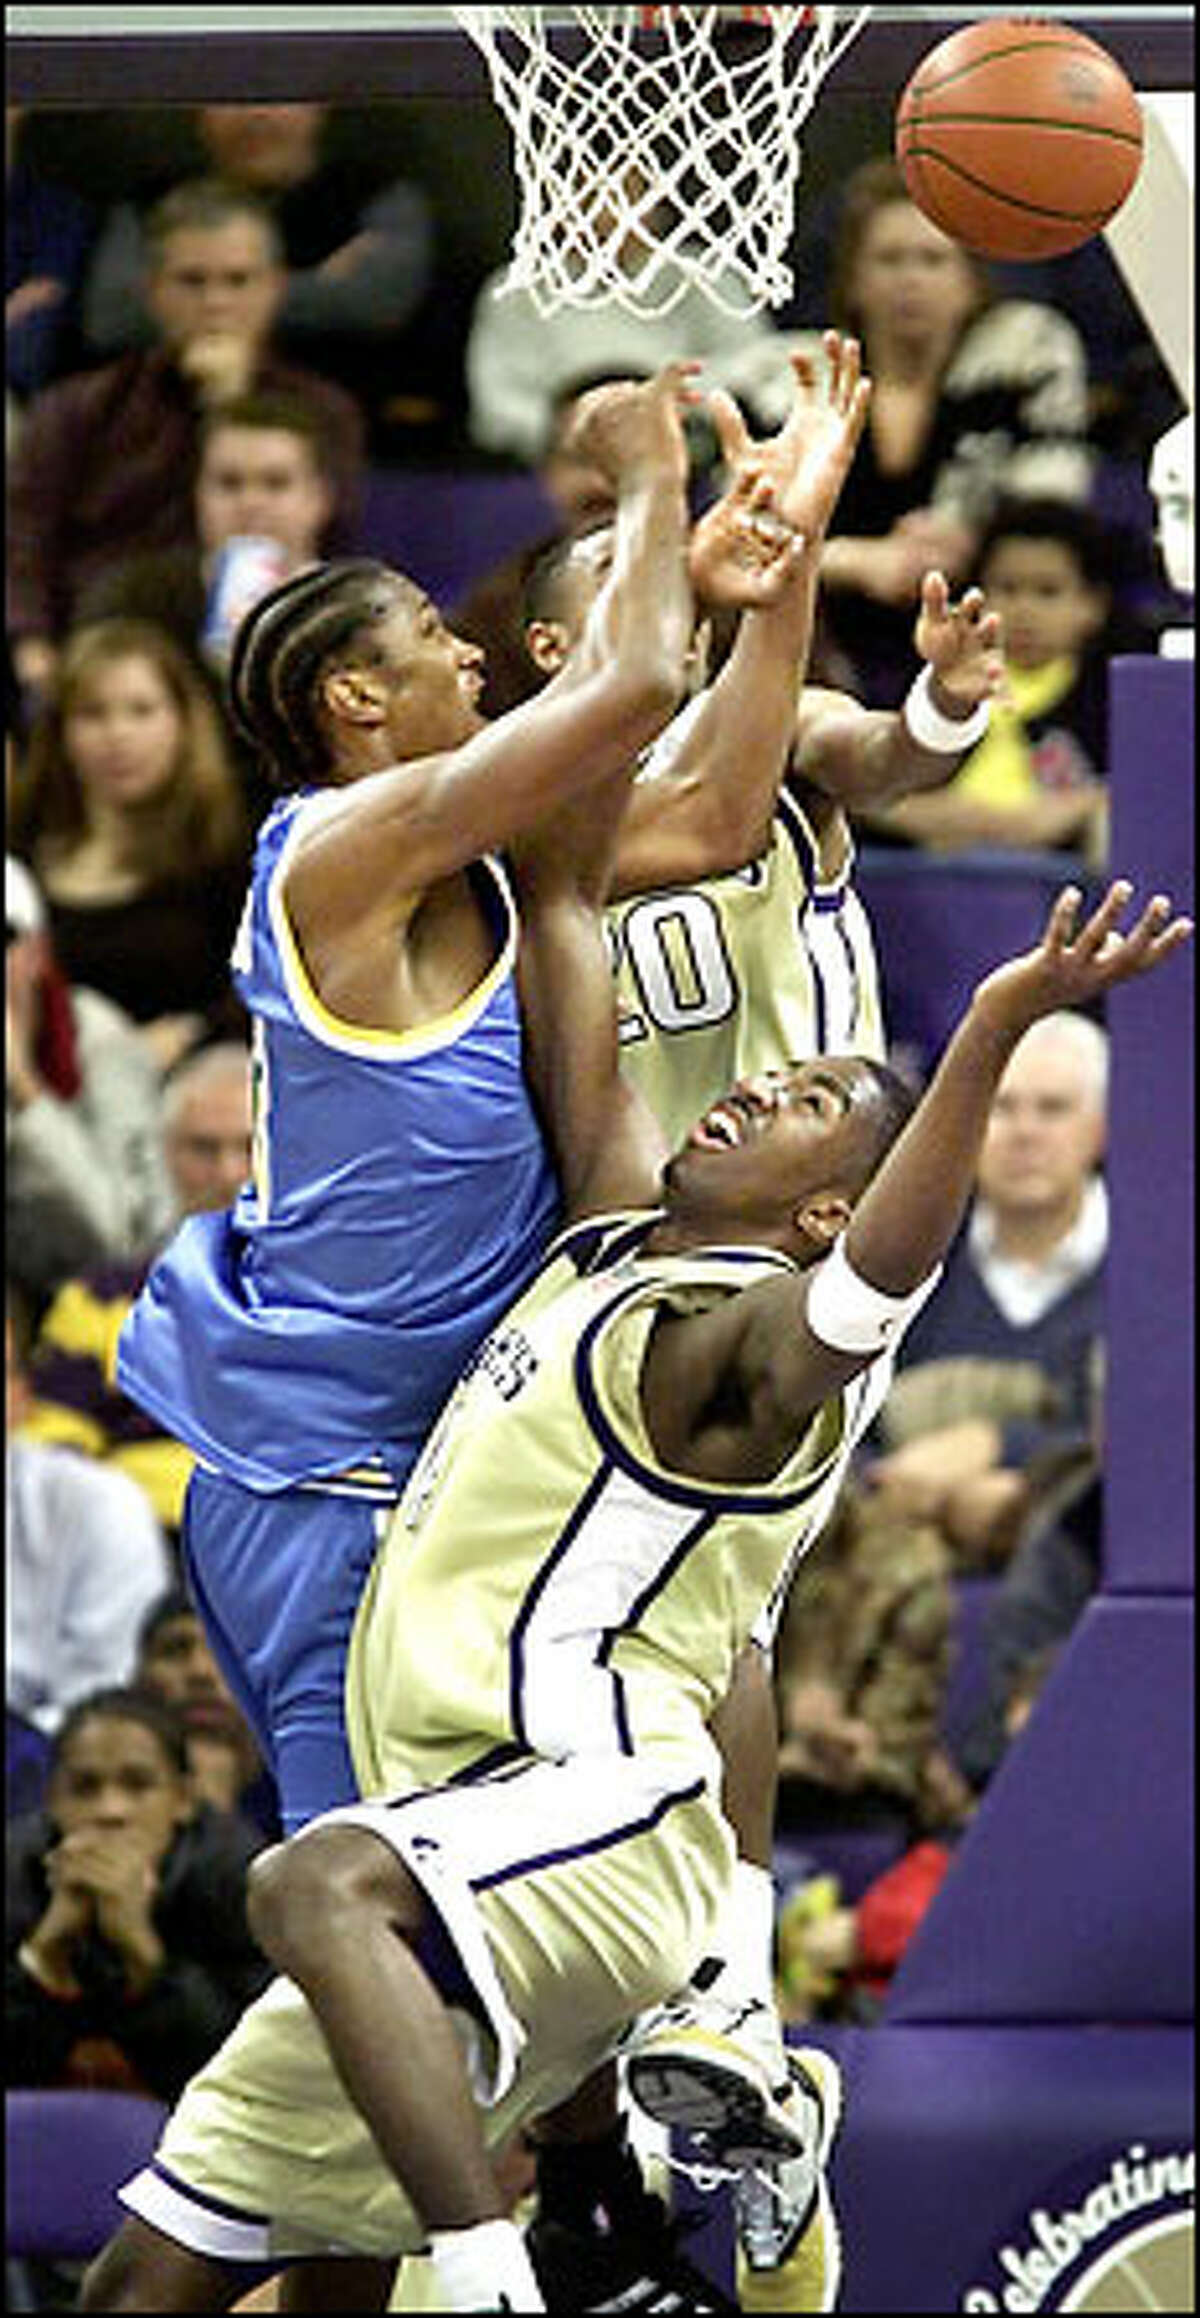 UCLA's T.J. Cummings has the ball knocked away on a drive against the Huskies' Curtis Allen (20) and Jeffrey Day.